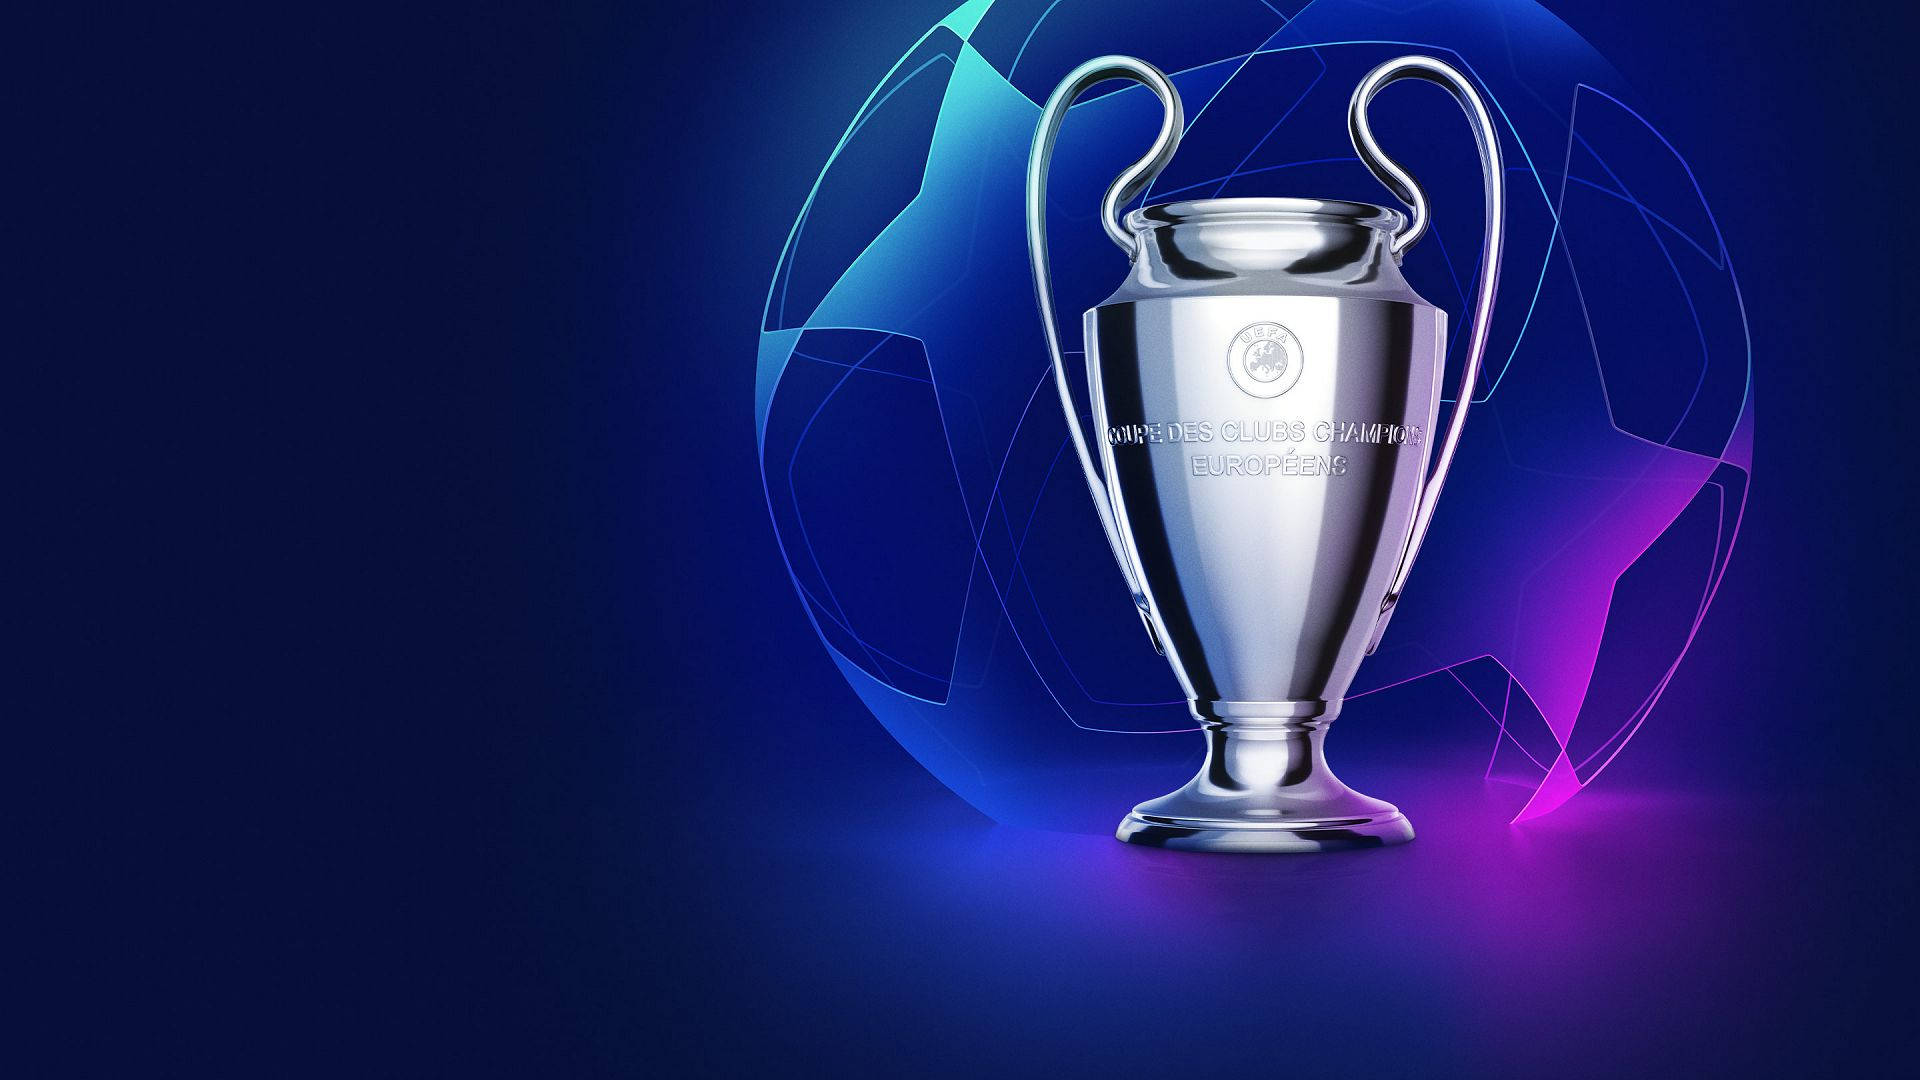 Discover 160+ champion trophy wallpaper latest